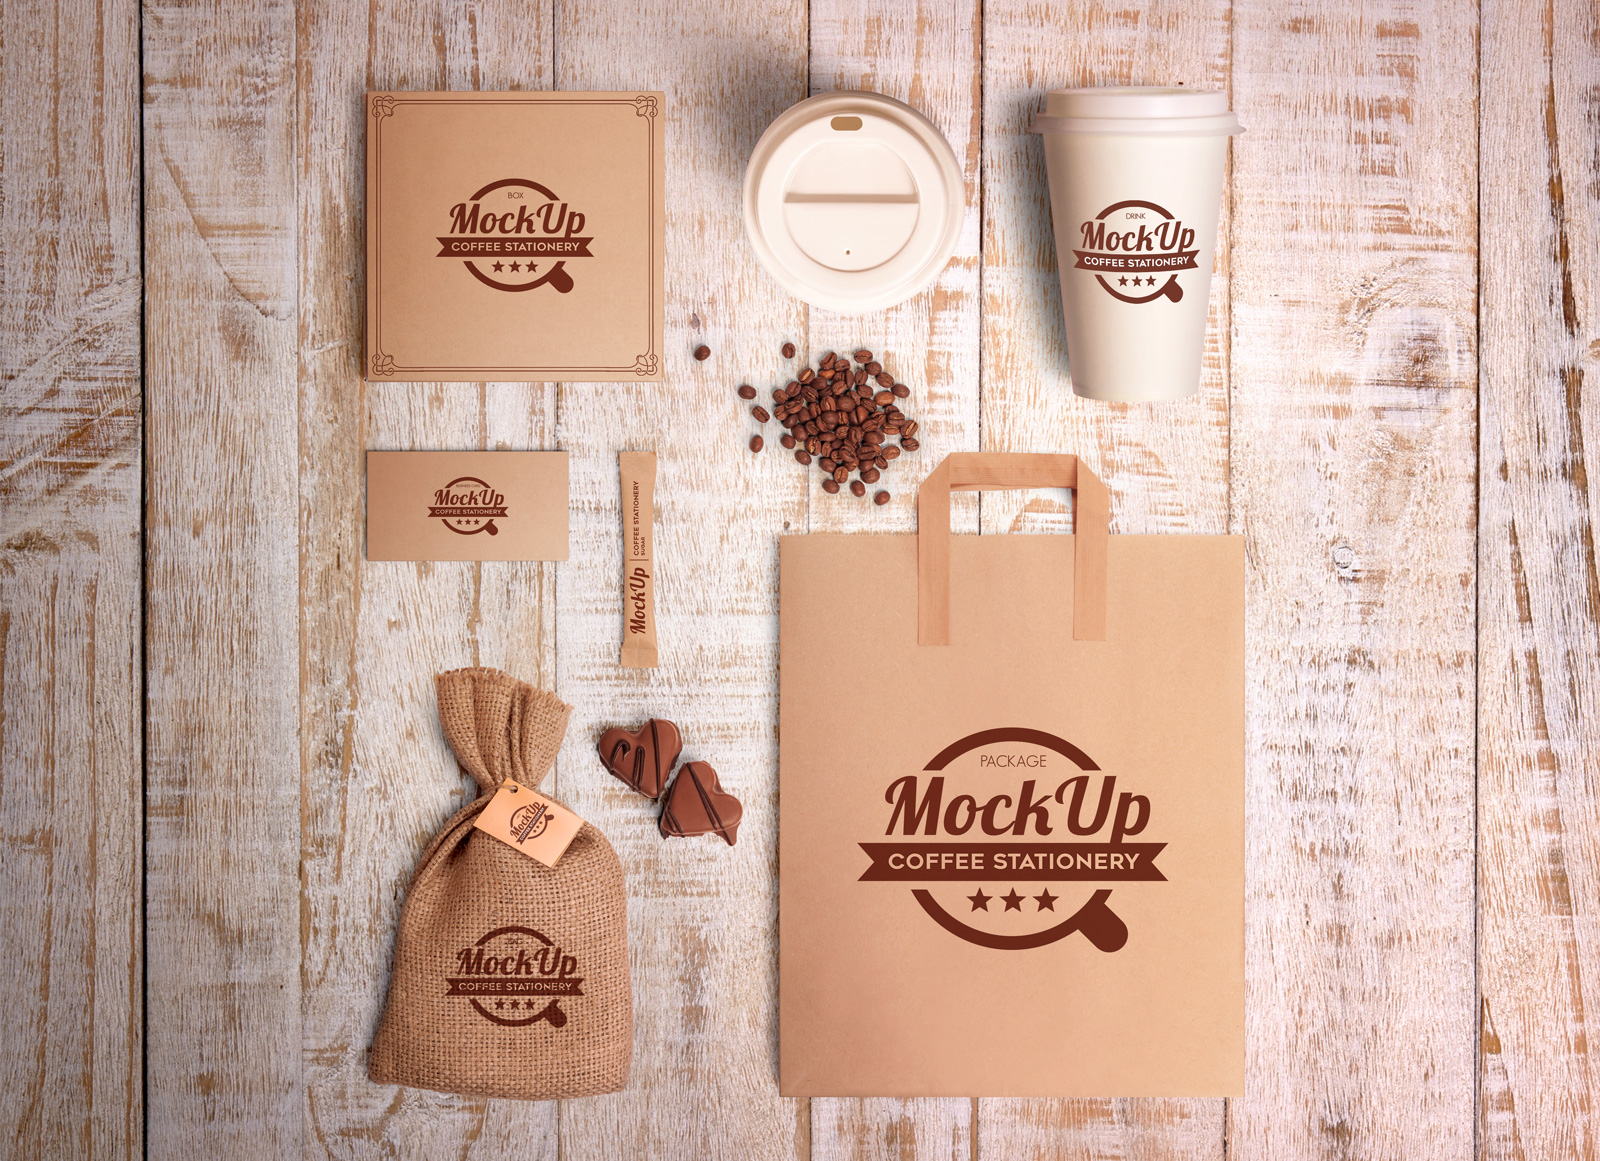 Free Pizza Box Packaging, Coffee Cup & Stationery Mockup PSD Files - Good Mockups